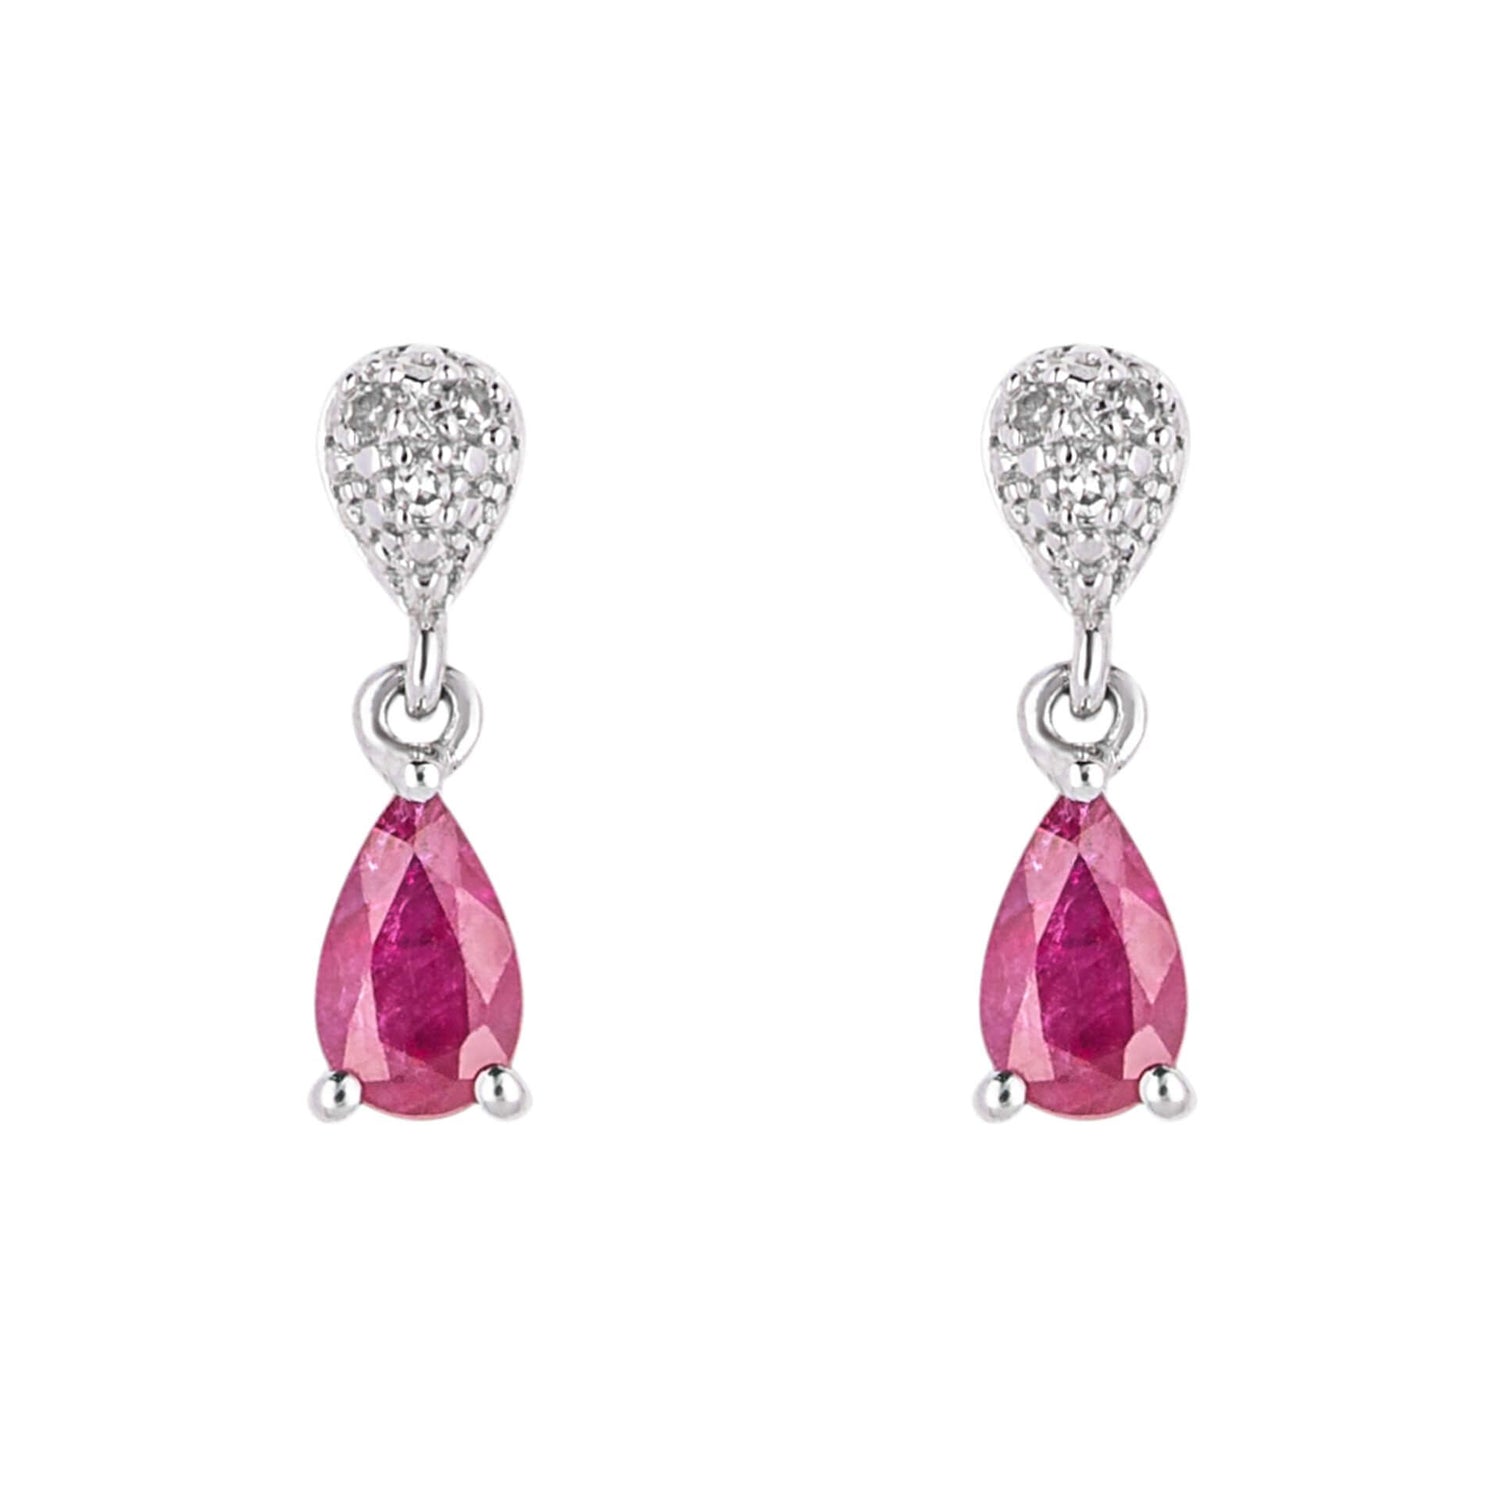 Ruby and Diamond Droplet Earrings in 9ct White Gold